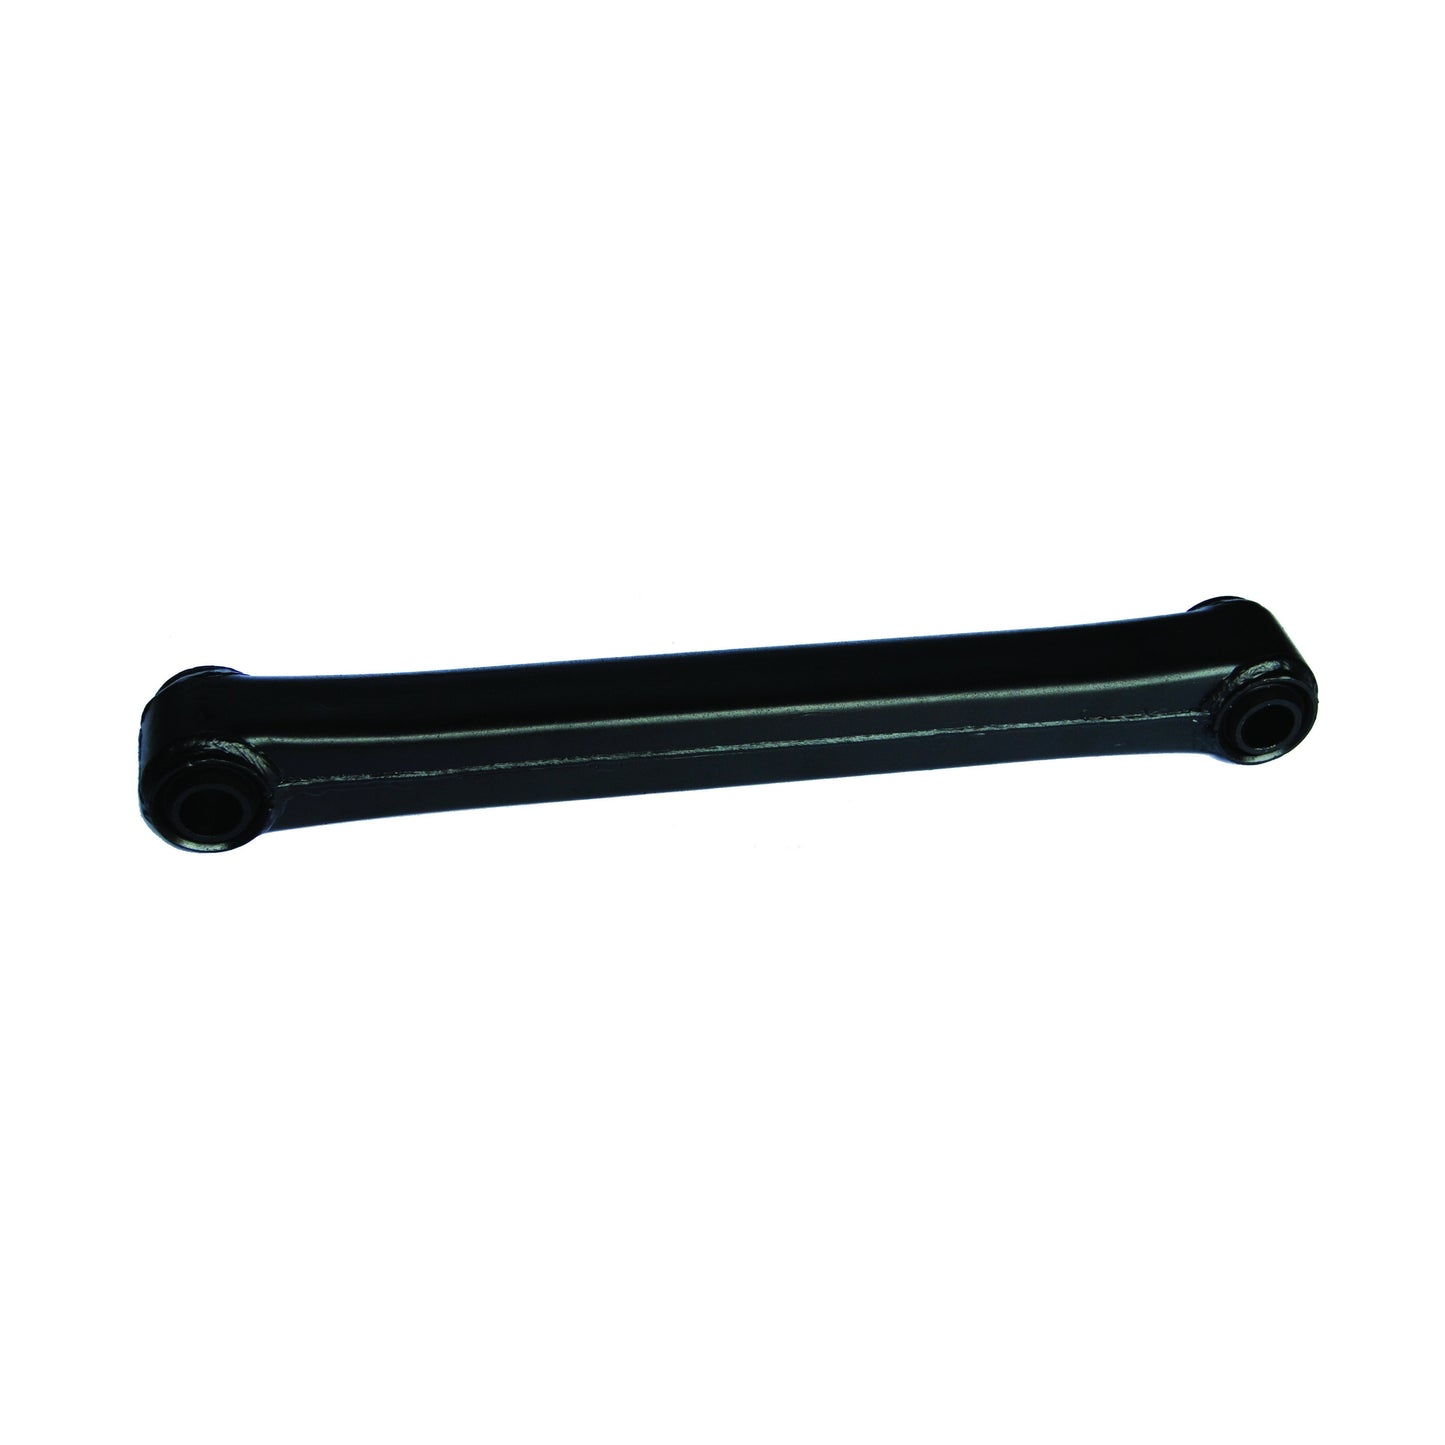 Fortpro Rigid Torque Rod with Bushing for Hutch - Replaces 715-00